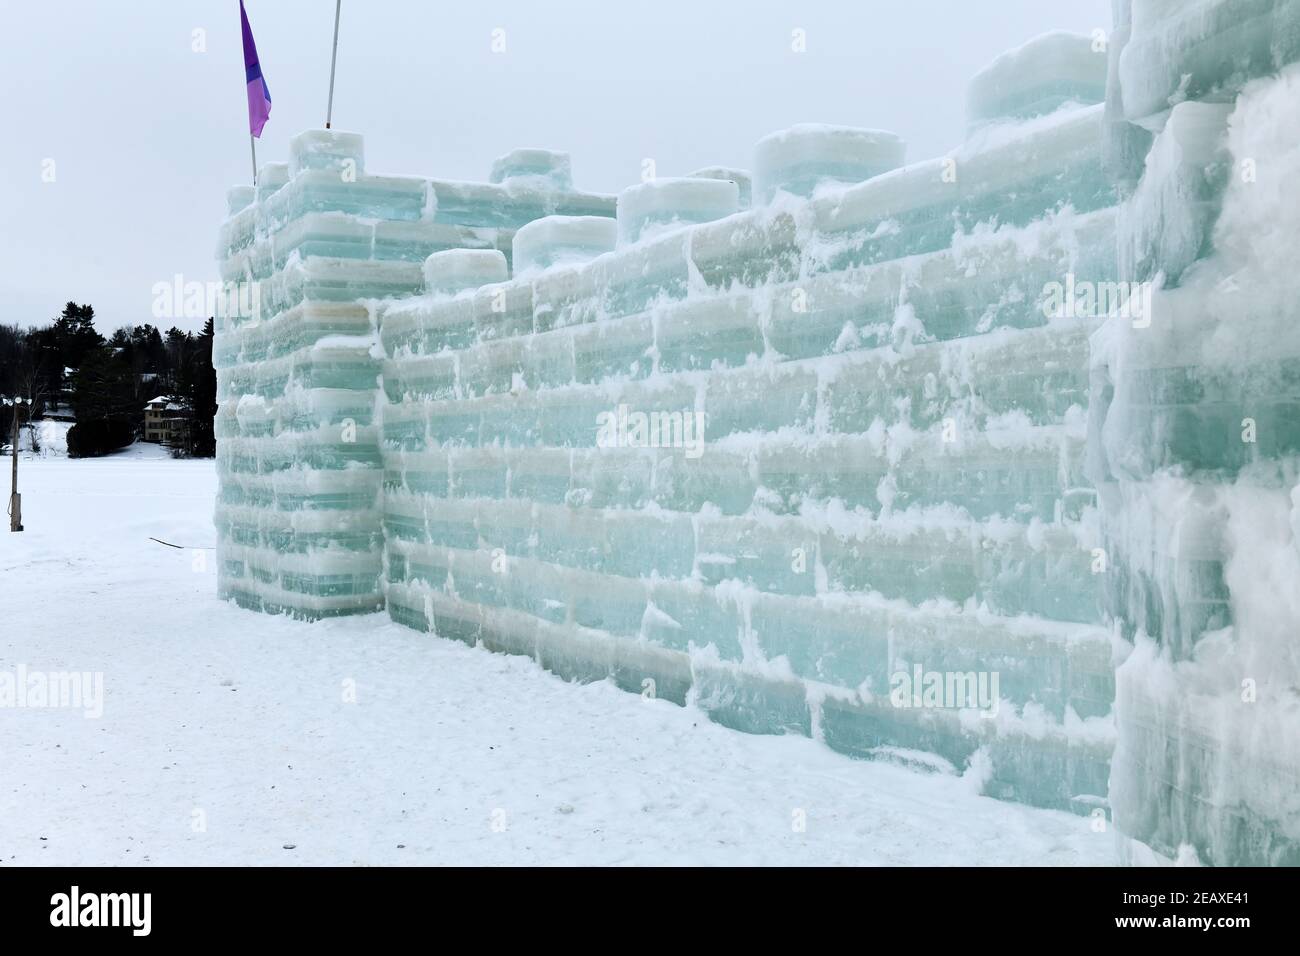 Winter scene with ice sculptures made from frozen blocks of lake water in the Adirondacks at Saranac Lake New York Stock Photo